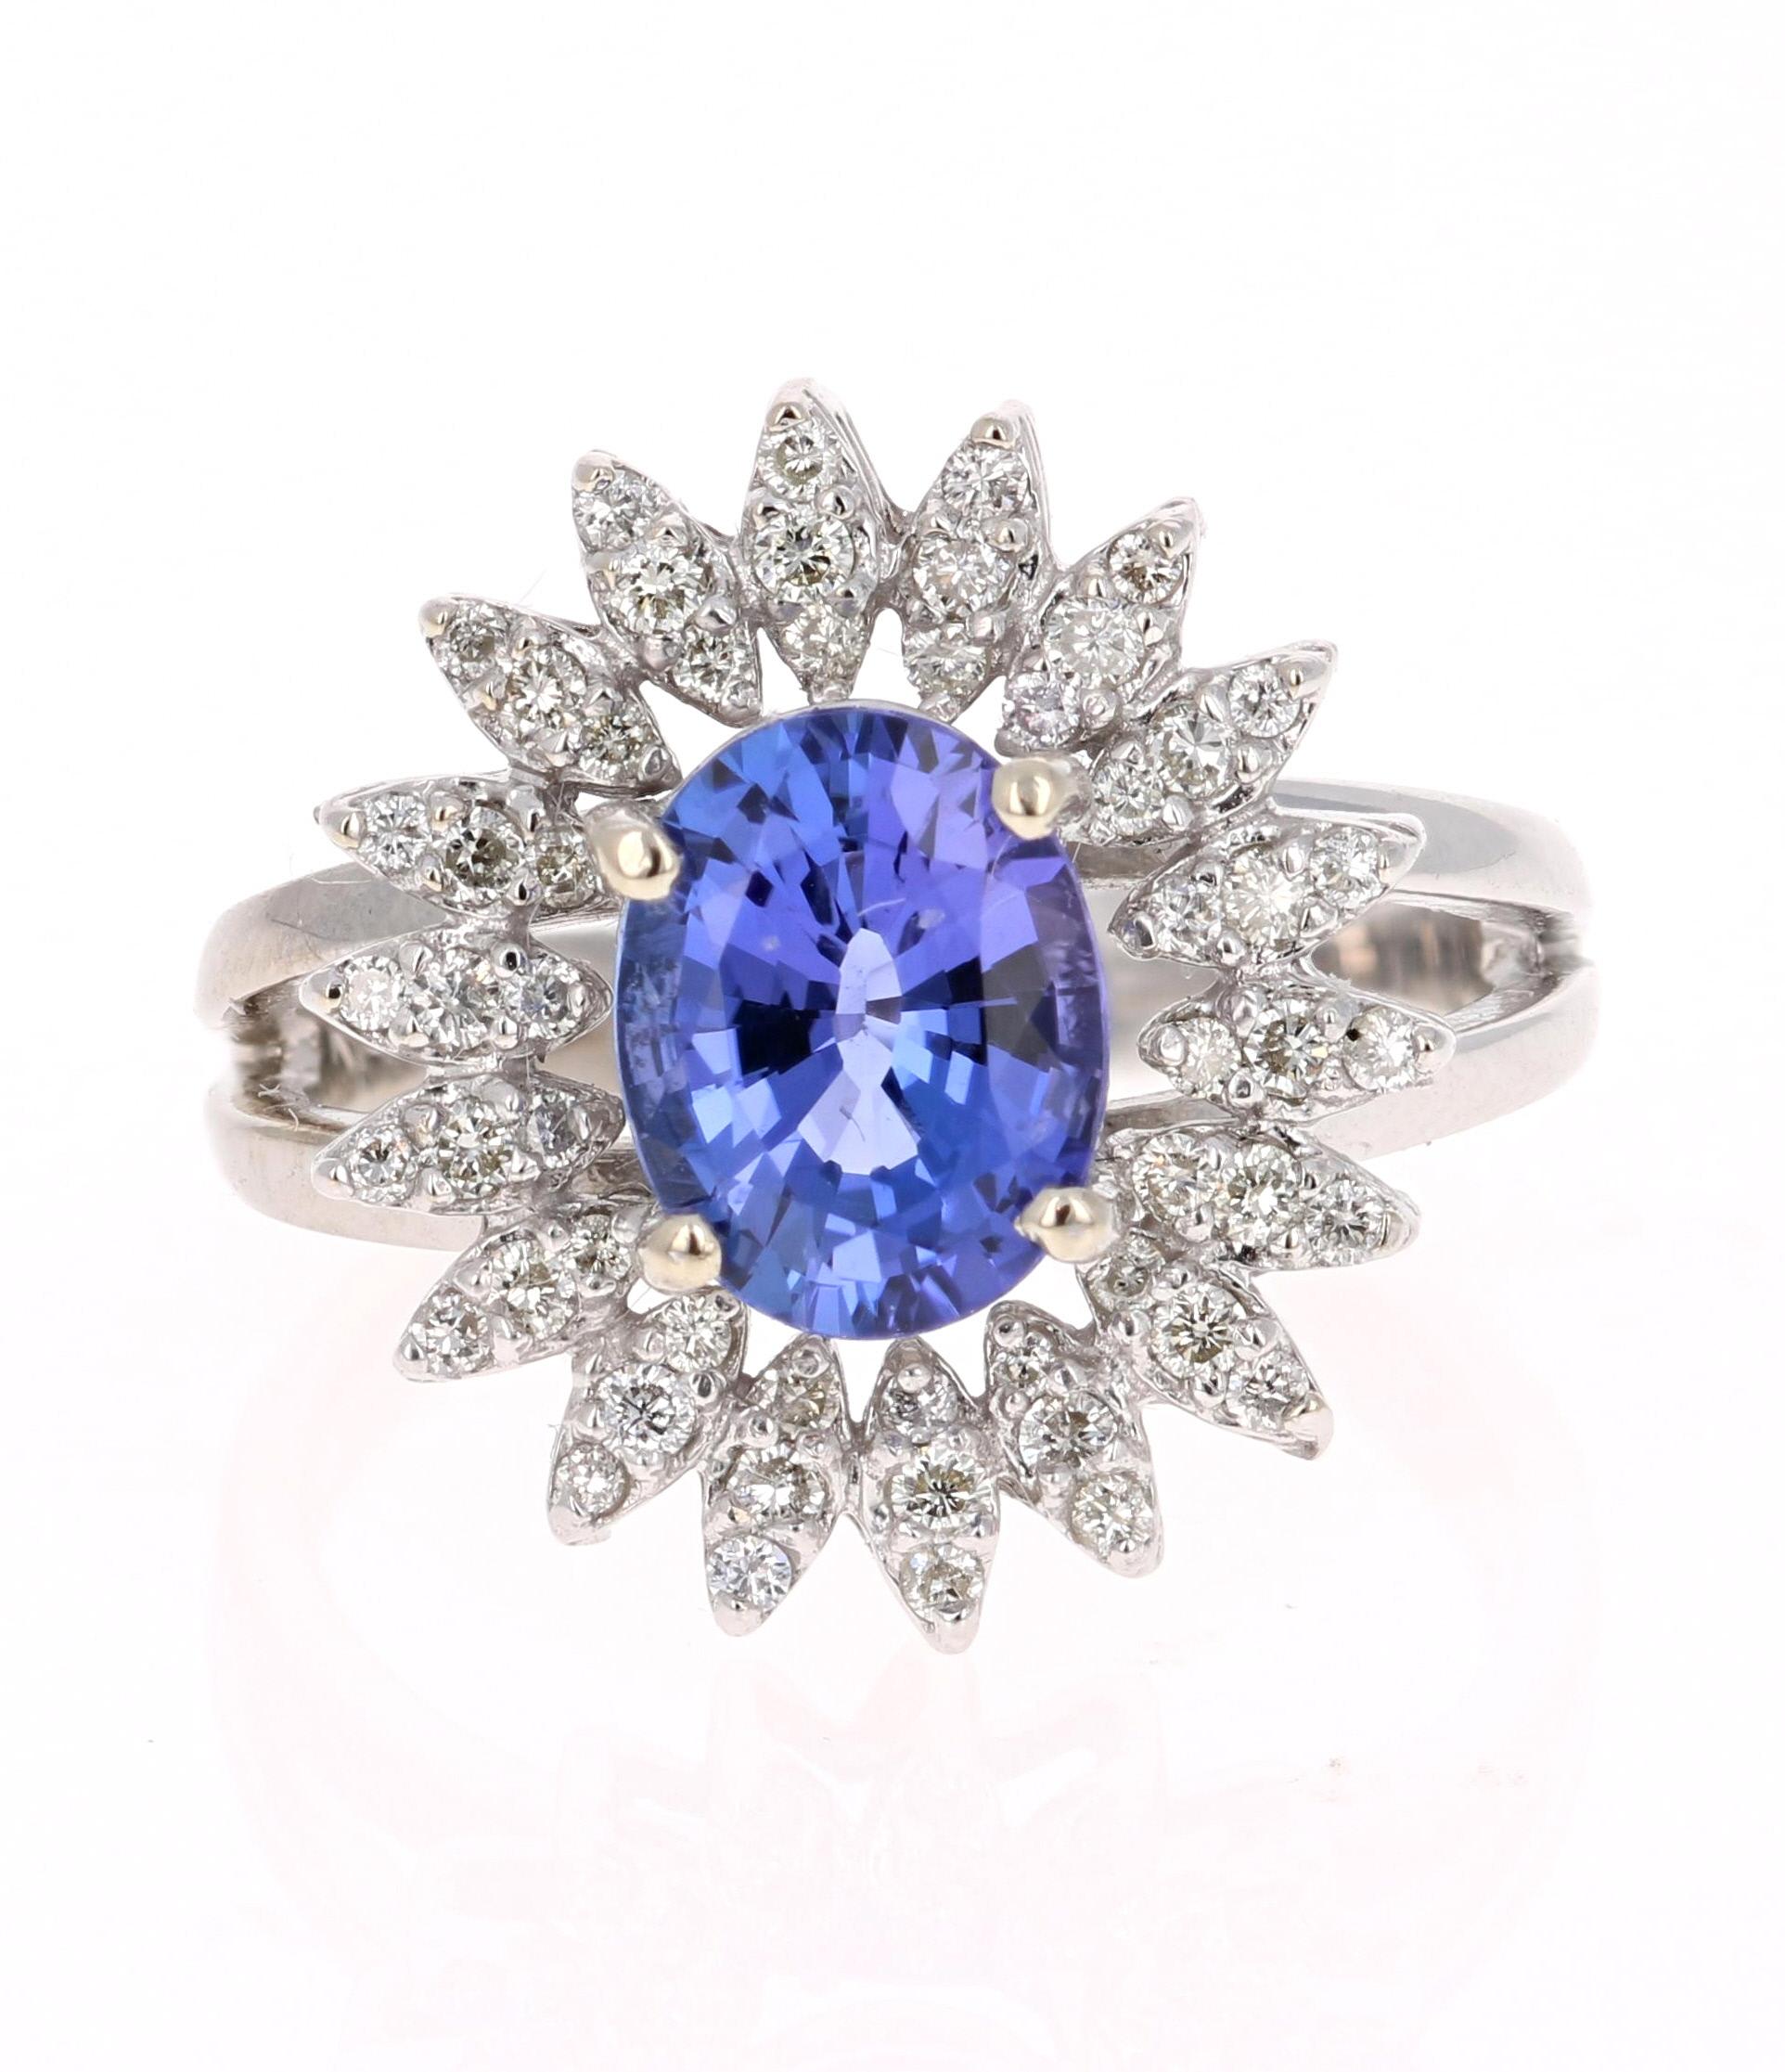 This gorgeous Tanzanite Diamond Ring has a 2.00 Carat Oval Cut Tanzanite as its center stone and has 54 Round Cut Diamonds that weigh 0.48 Carats. The setting has a beautiful design that can be viewed as a unique flower. The Total Carat weight of